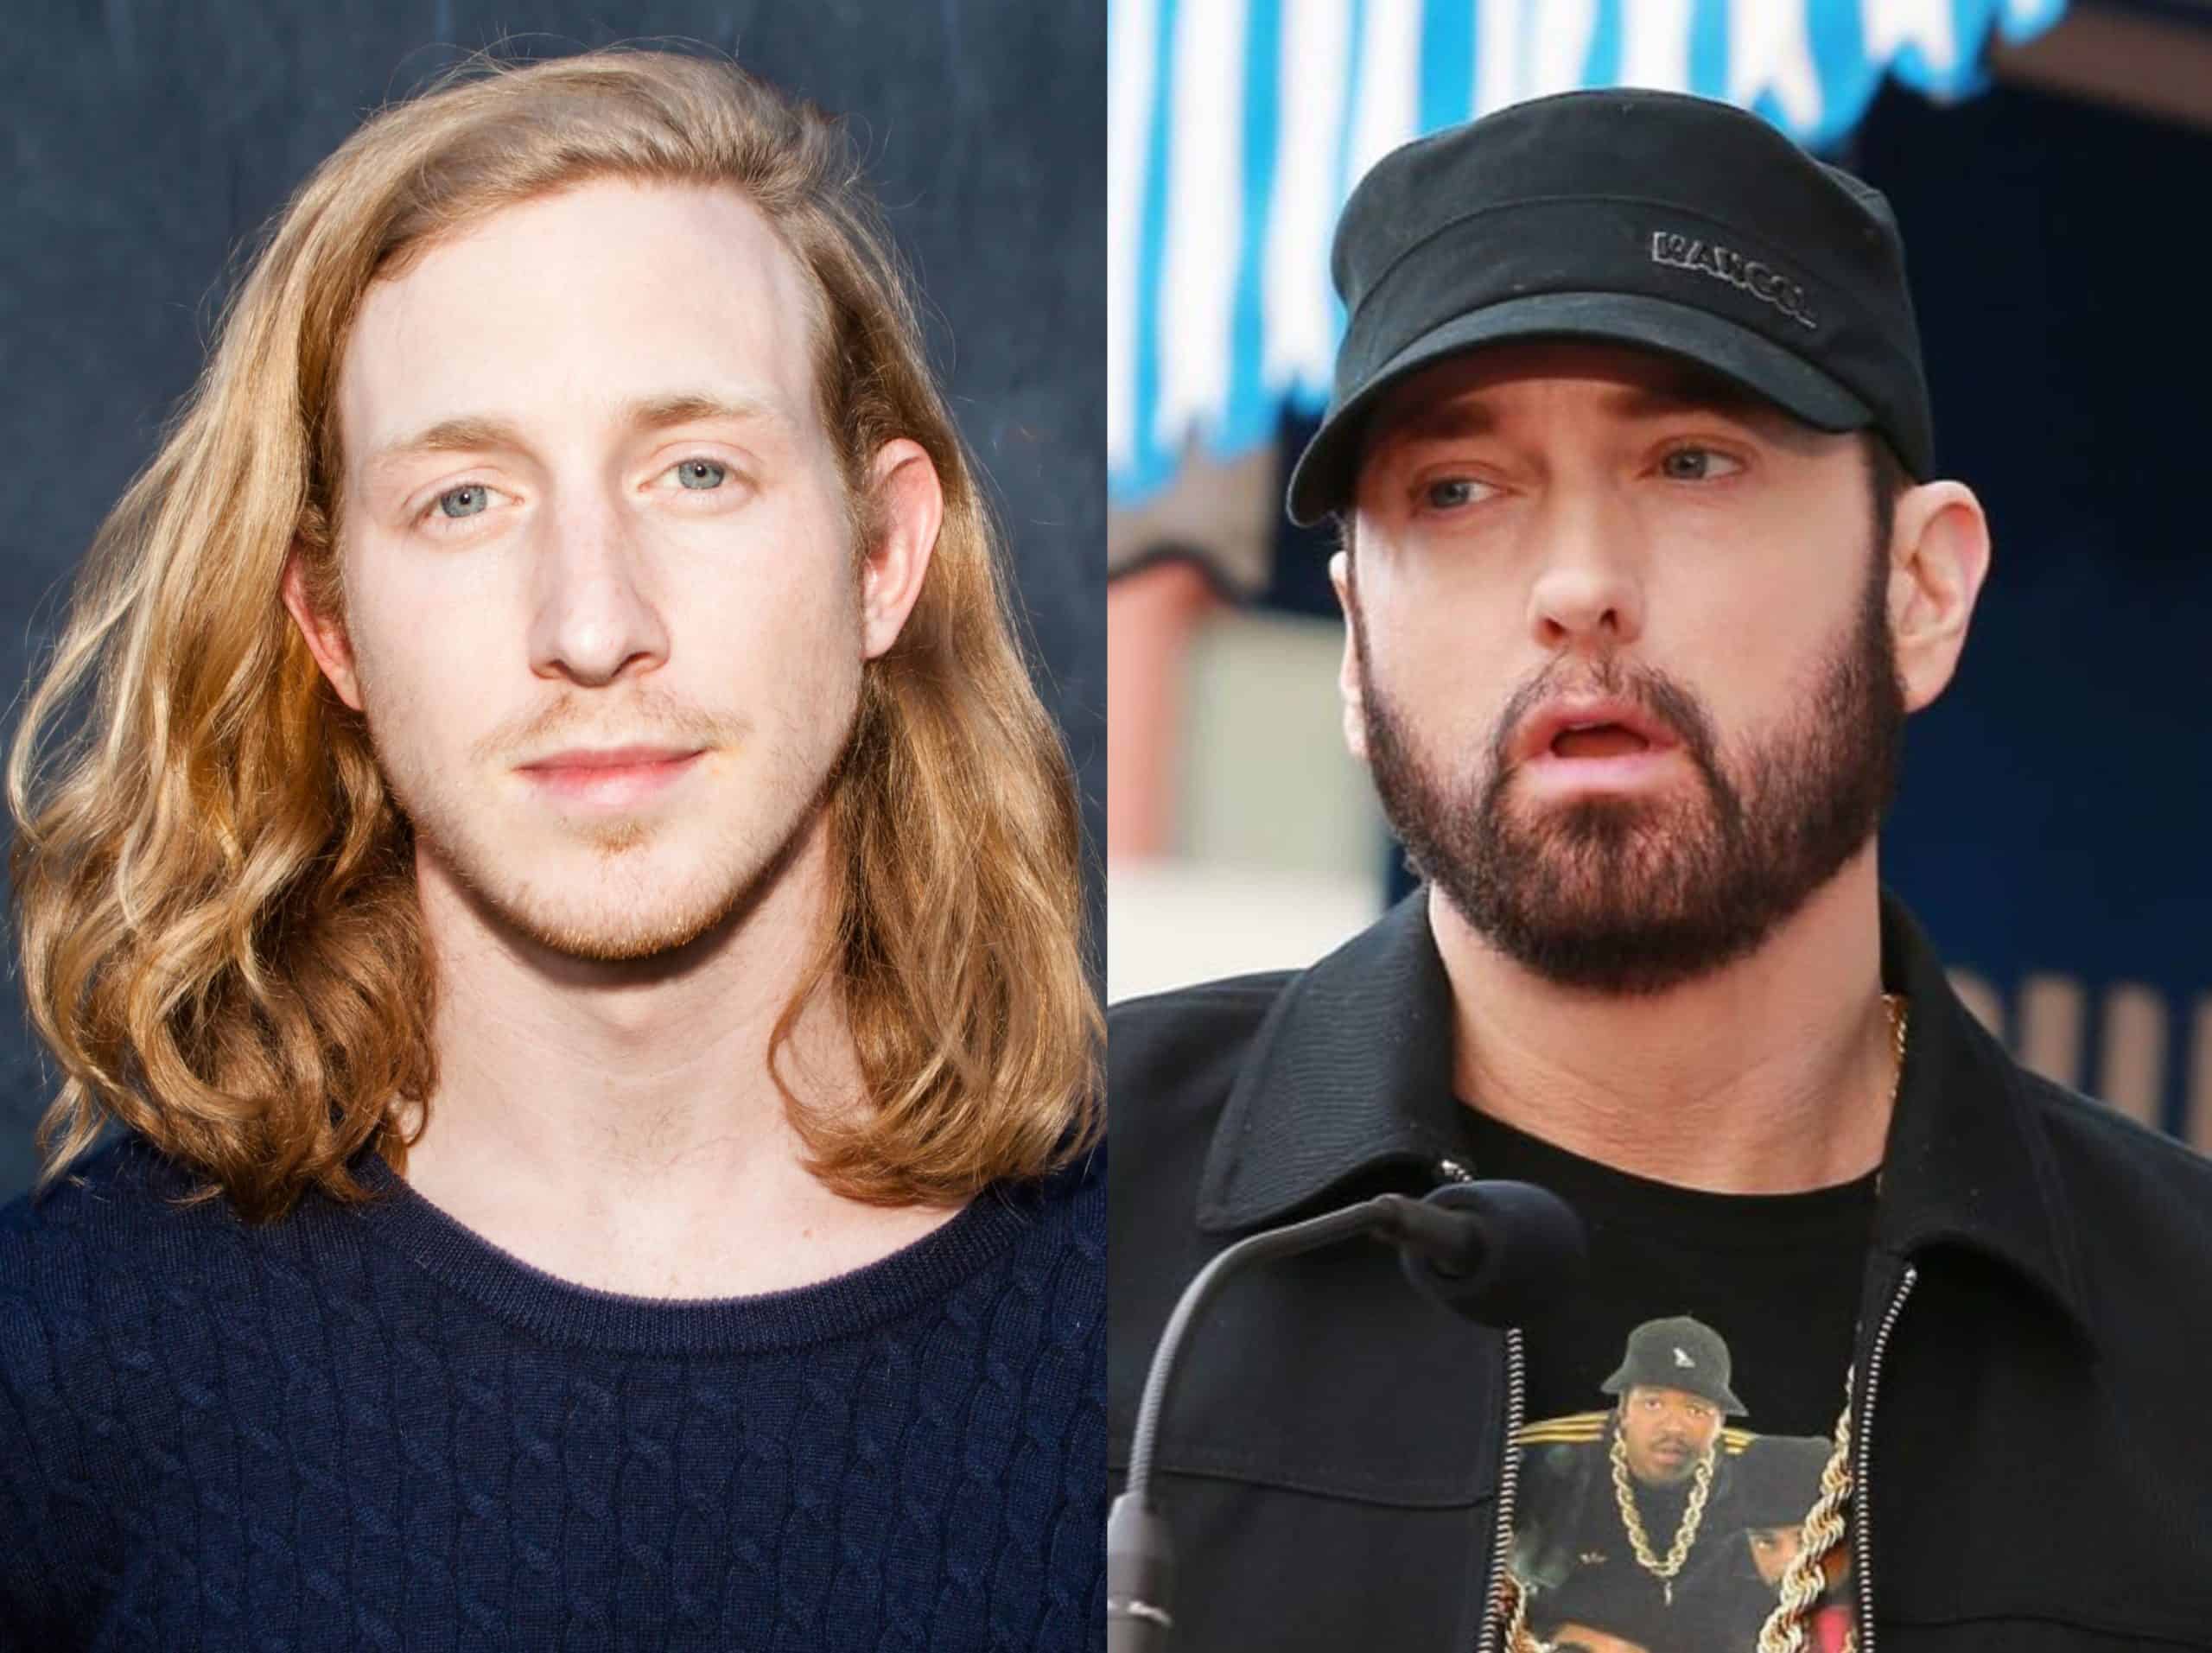 Asher Roth Speaks on Eminem Comparisons & Getting Dissed By Him